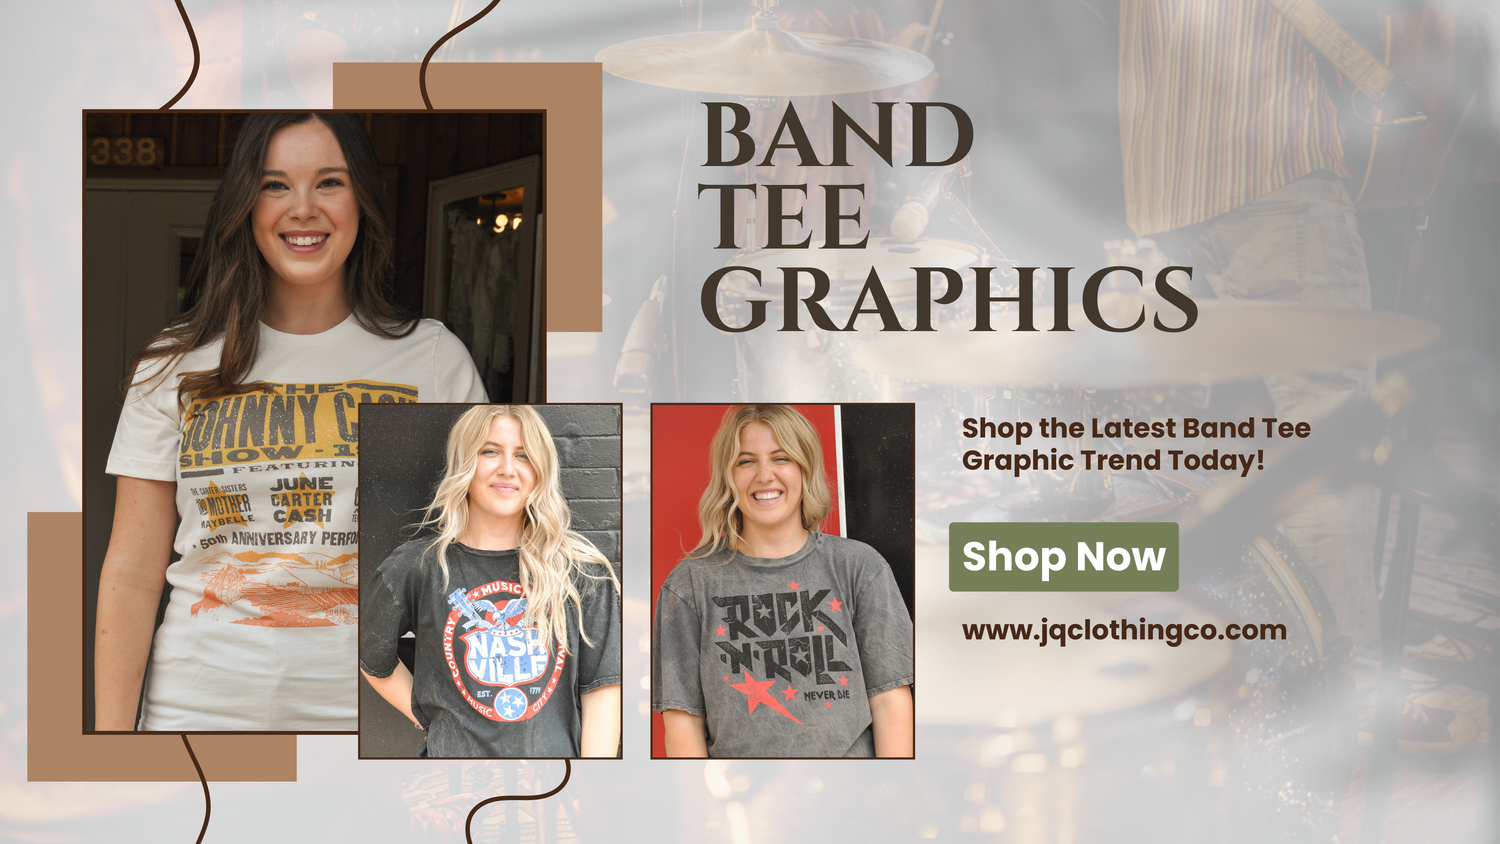 Rock your style with band tees!